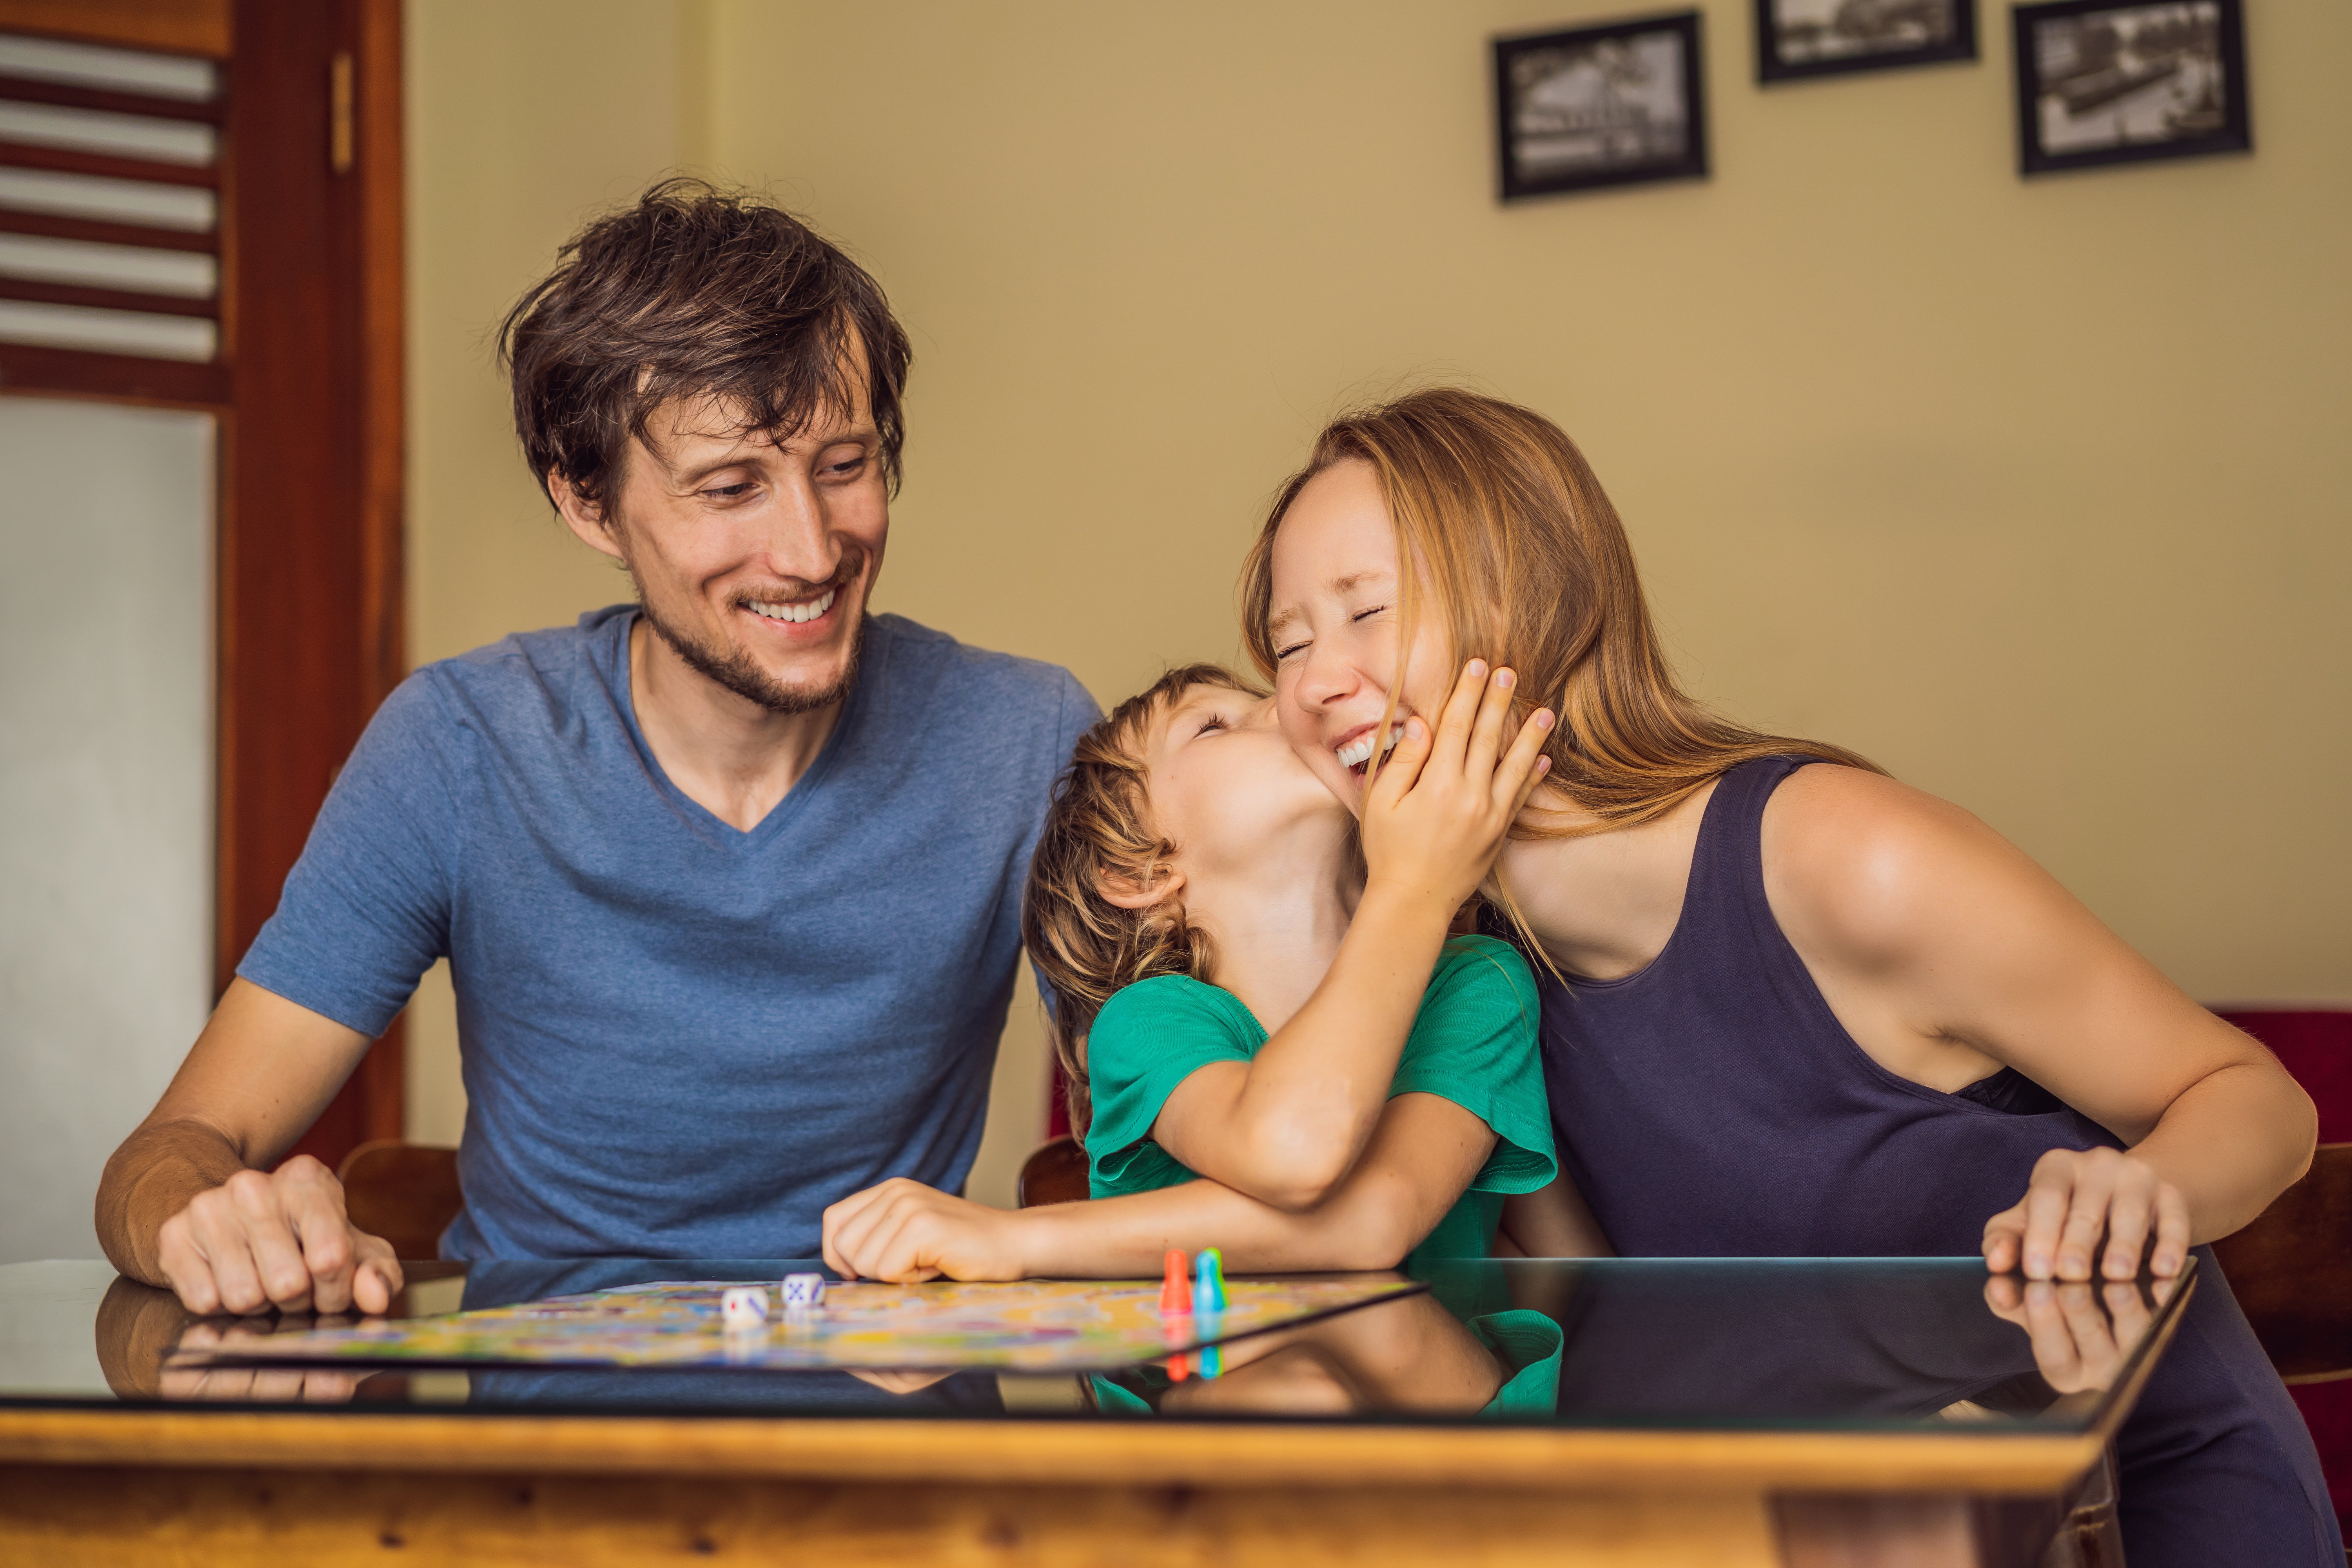 board-game-family-playing-games-seated-at-table